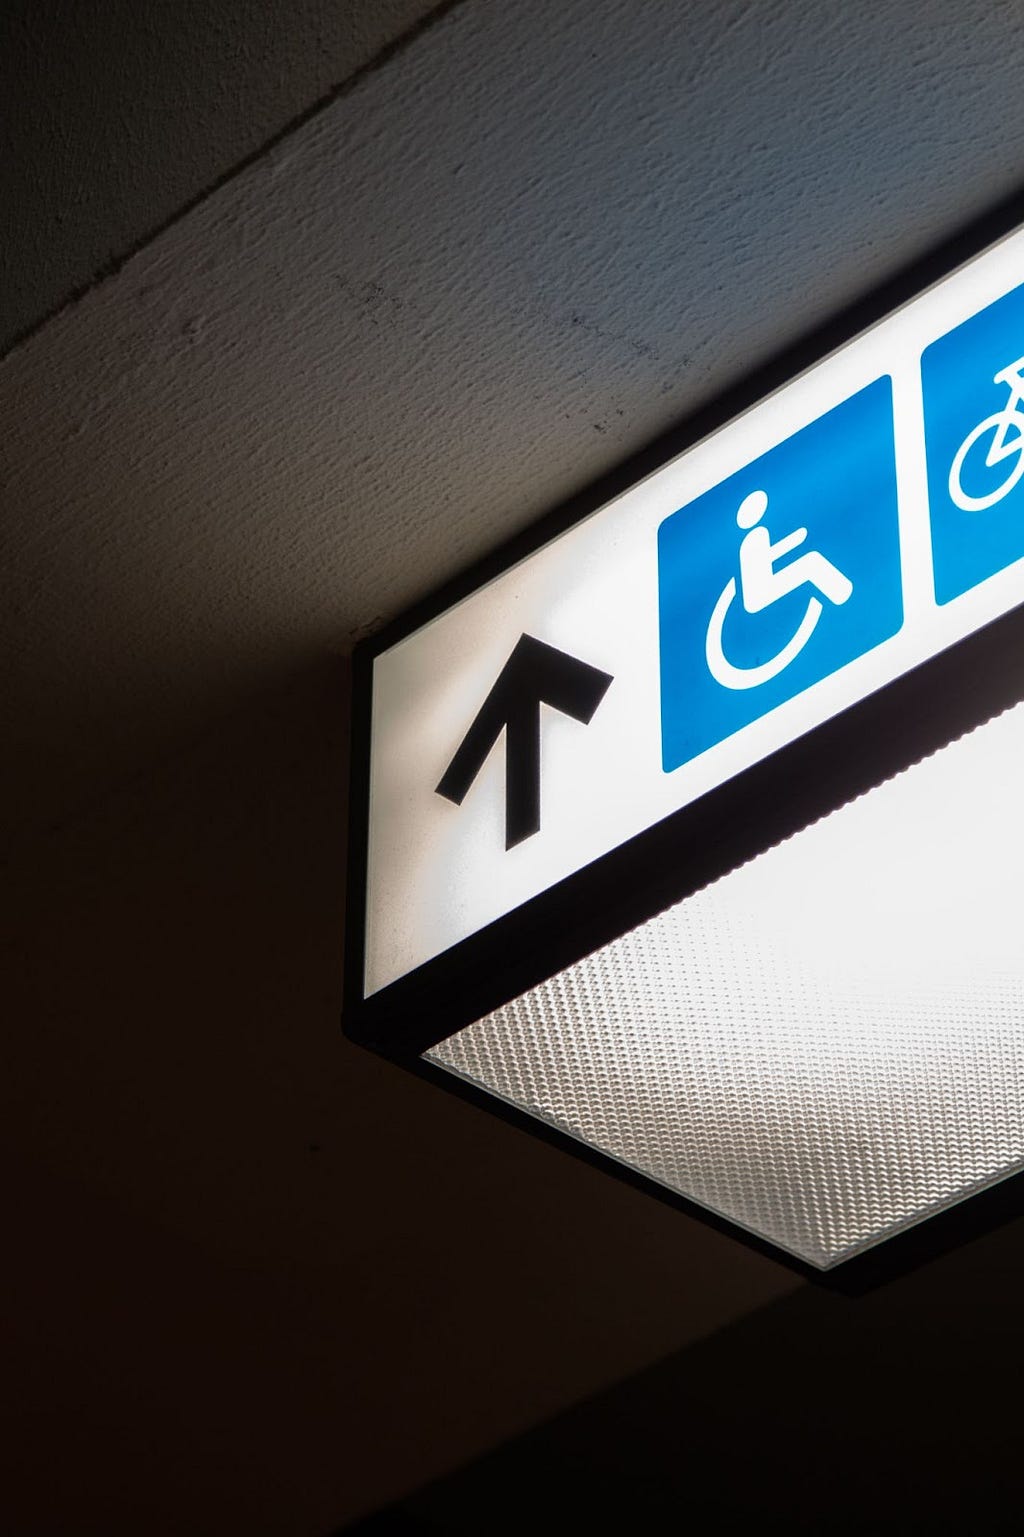 A photo of an illuminate white sign hanging from a ceiling. The front of the sign features a blue and white disability symbol of a person in a wheelchair, next to a black arrow pointing straight ahead.